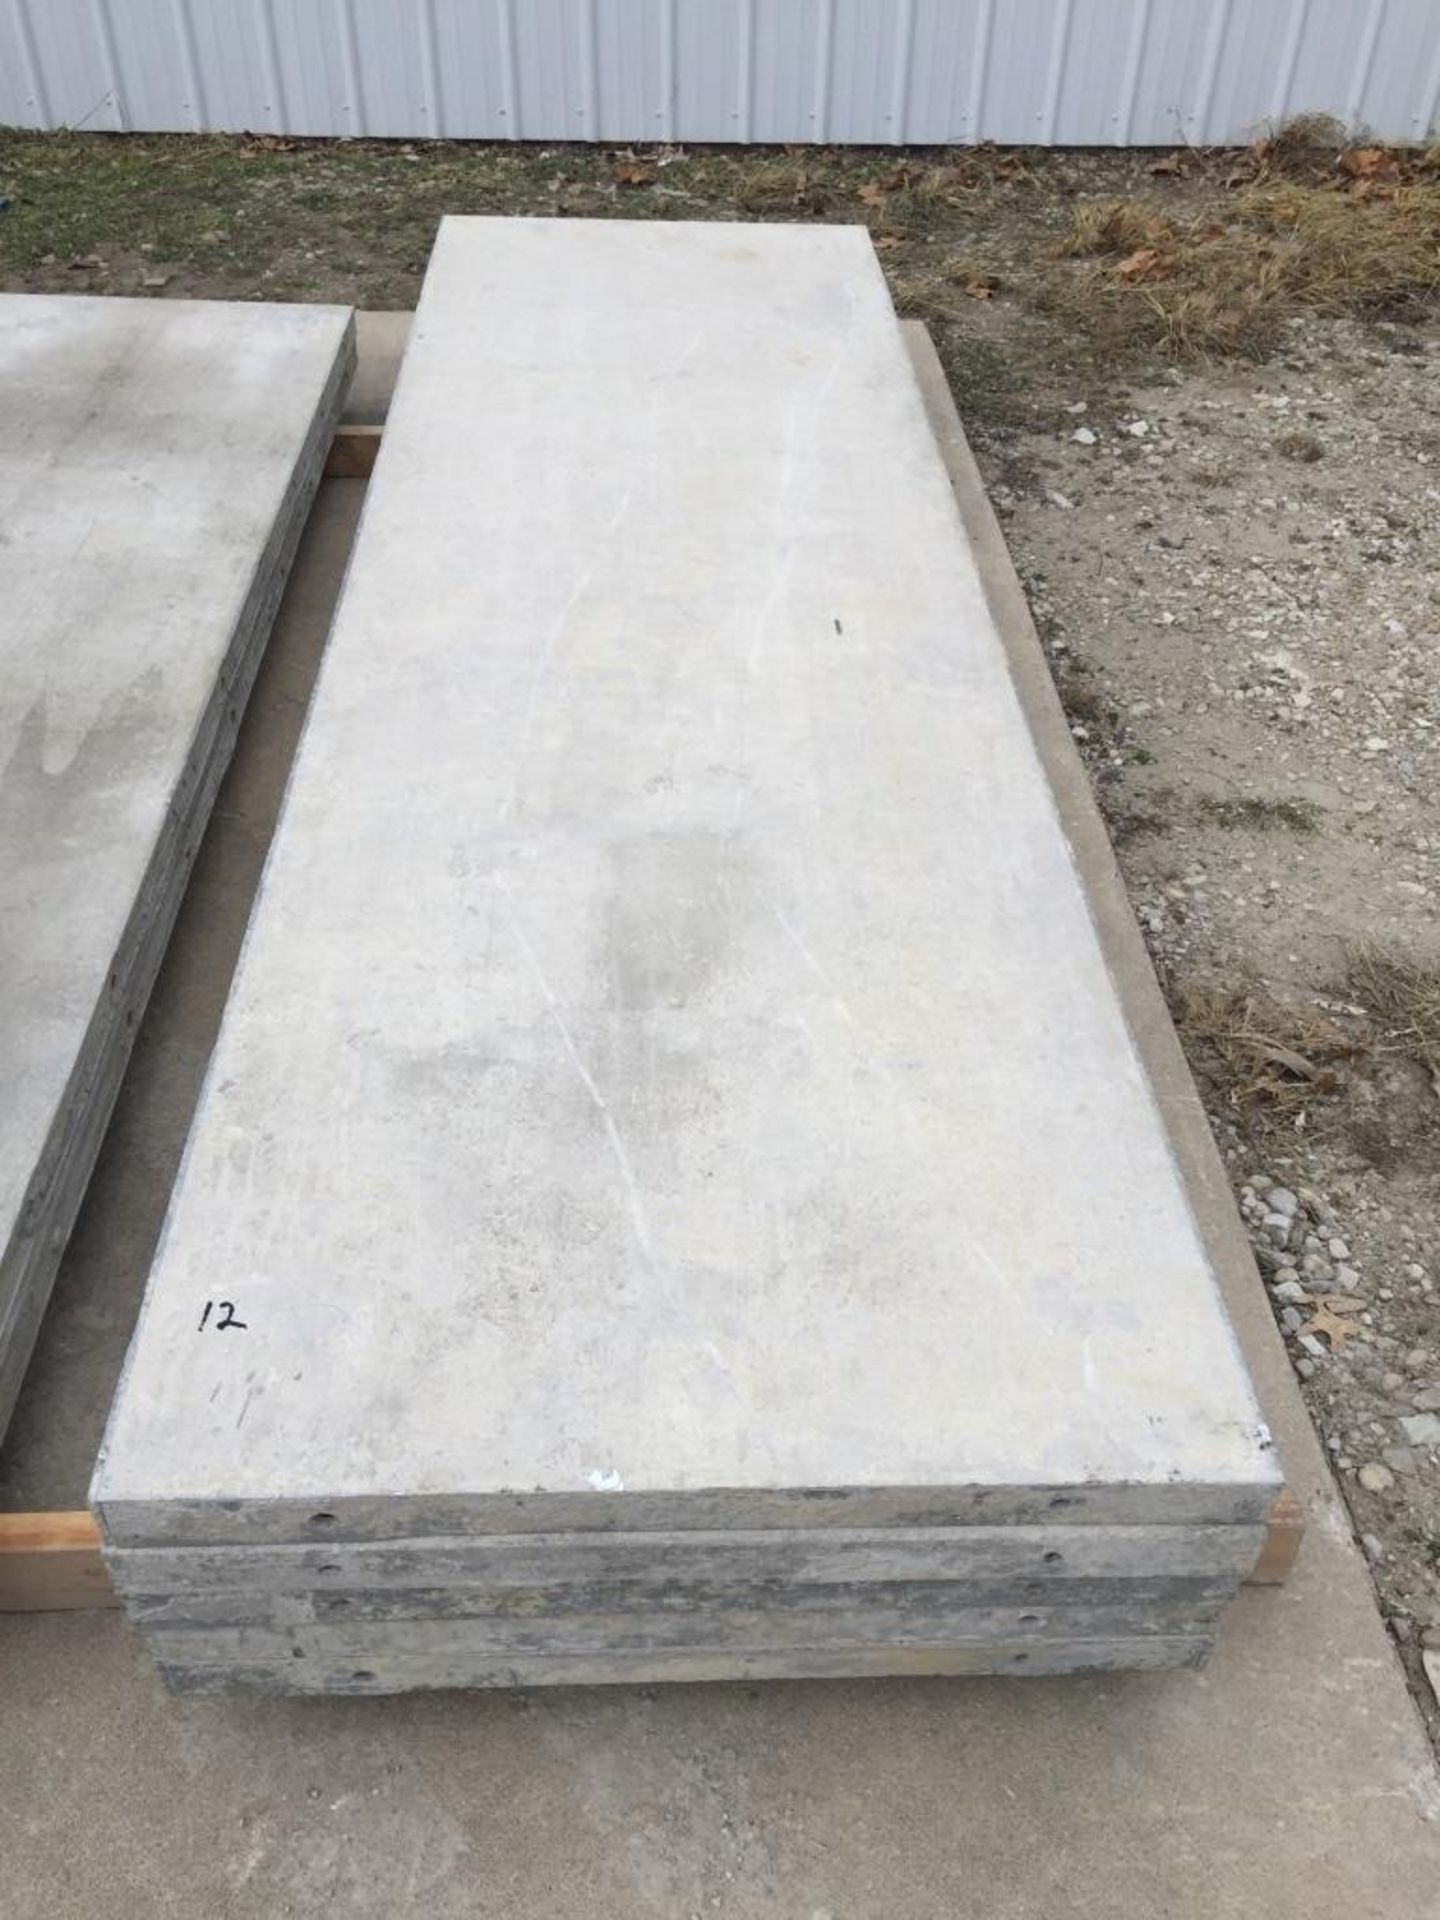 (5) Wall-Ties 32" x 9' aluminum concrete forms, smooth, 6-12 hole pattern